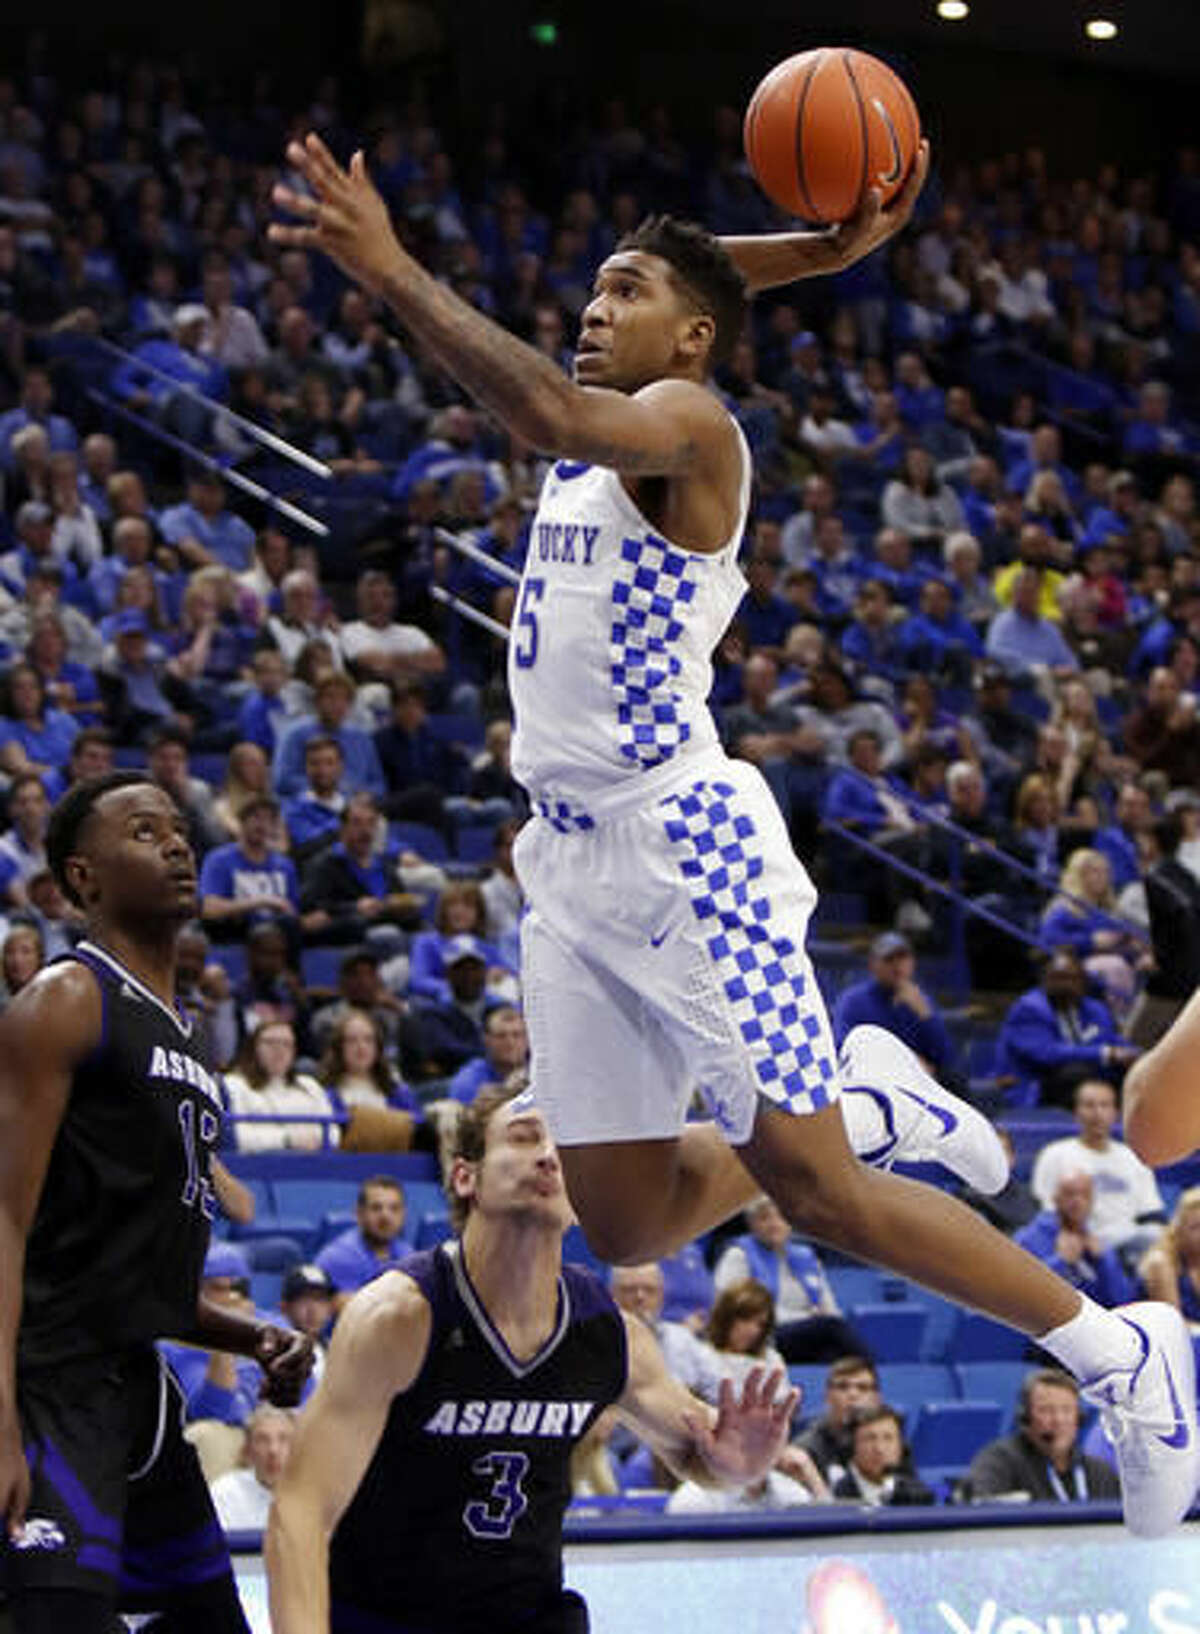 FILE - In this Nov. 6, 2016, file photo, Kentucky's Malik Monk, right, dunks near Asbury's Bushe Ramabu, left, and Daulton Peters during the second half of an NCAA college basketball exhibition game, in Lexington, Ky. Kentucky’s John Calipari landed five of the nation’s top 24 prospects according to composite rankings of recruiting websites compiled by 247Sports. The new Wildcats include guards De’Aaron Fox, Malik Monk, Bam Adebayo, Wenyen Gabriel and Sacha Killeya-Jones. (AP Photo/James Crisp, File)